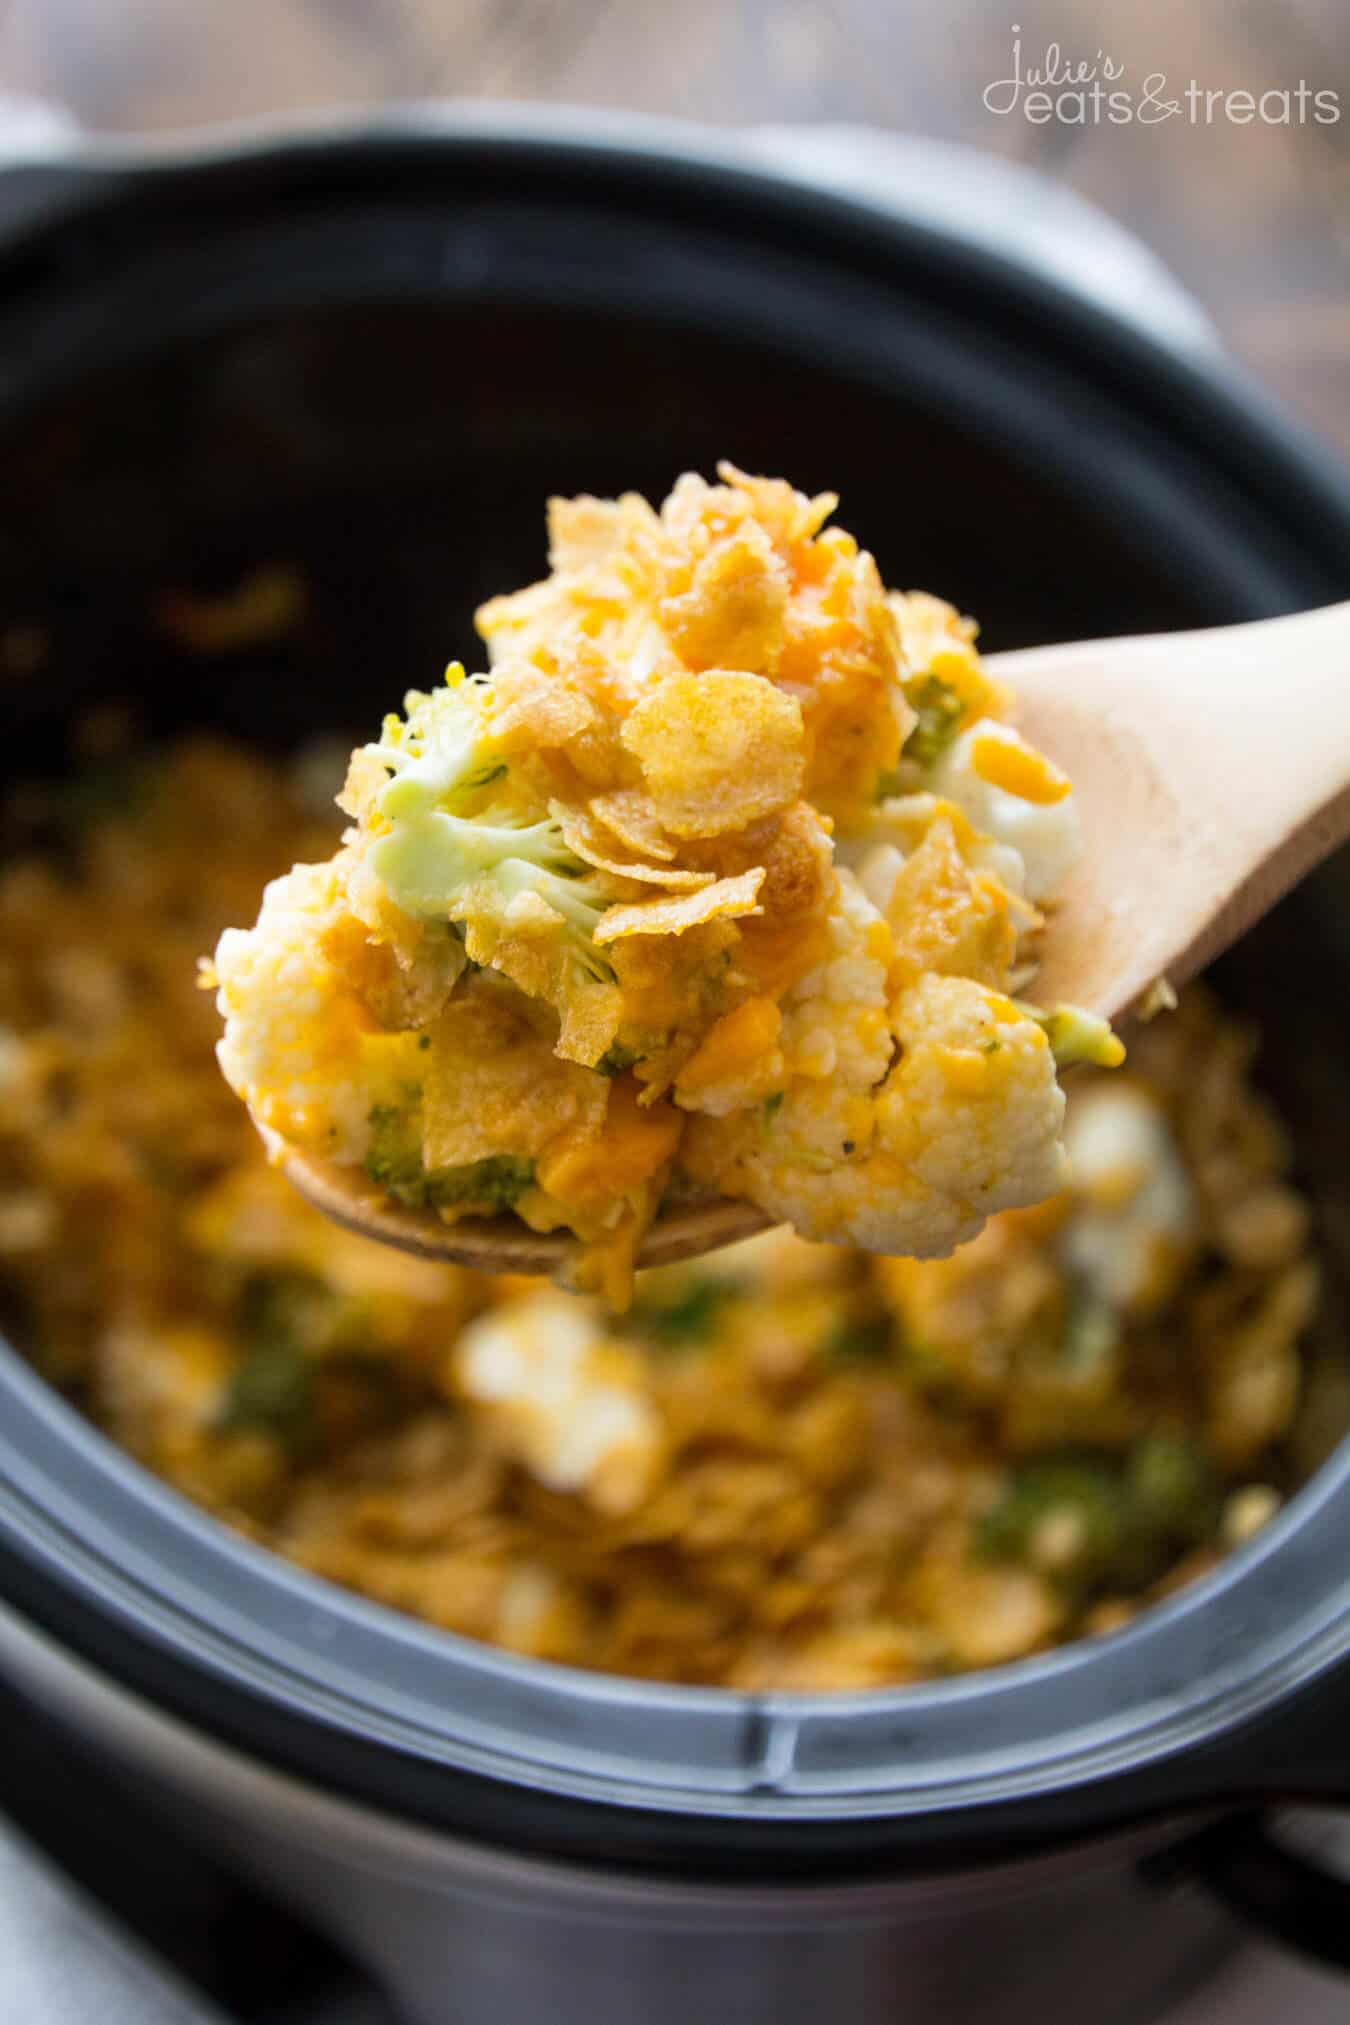 Crock Pot Cauliflower Broccoli Casserole Recipe ~ The Perfect Side Dish Recipe in your Slow Cooker! Broccoli and Cauliflower Smothered in Cheese and Topped with Corn Flakes!